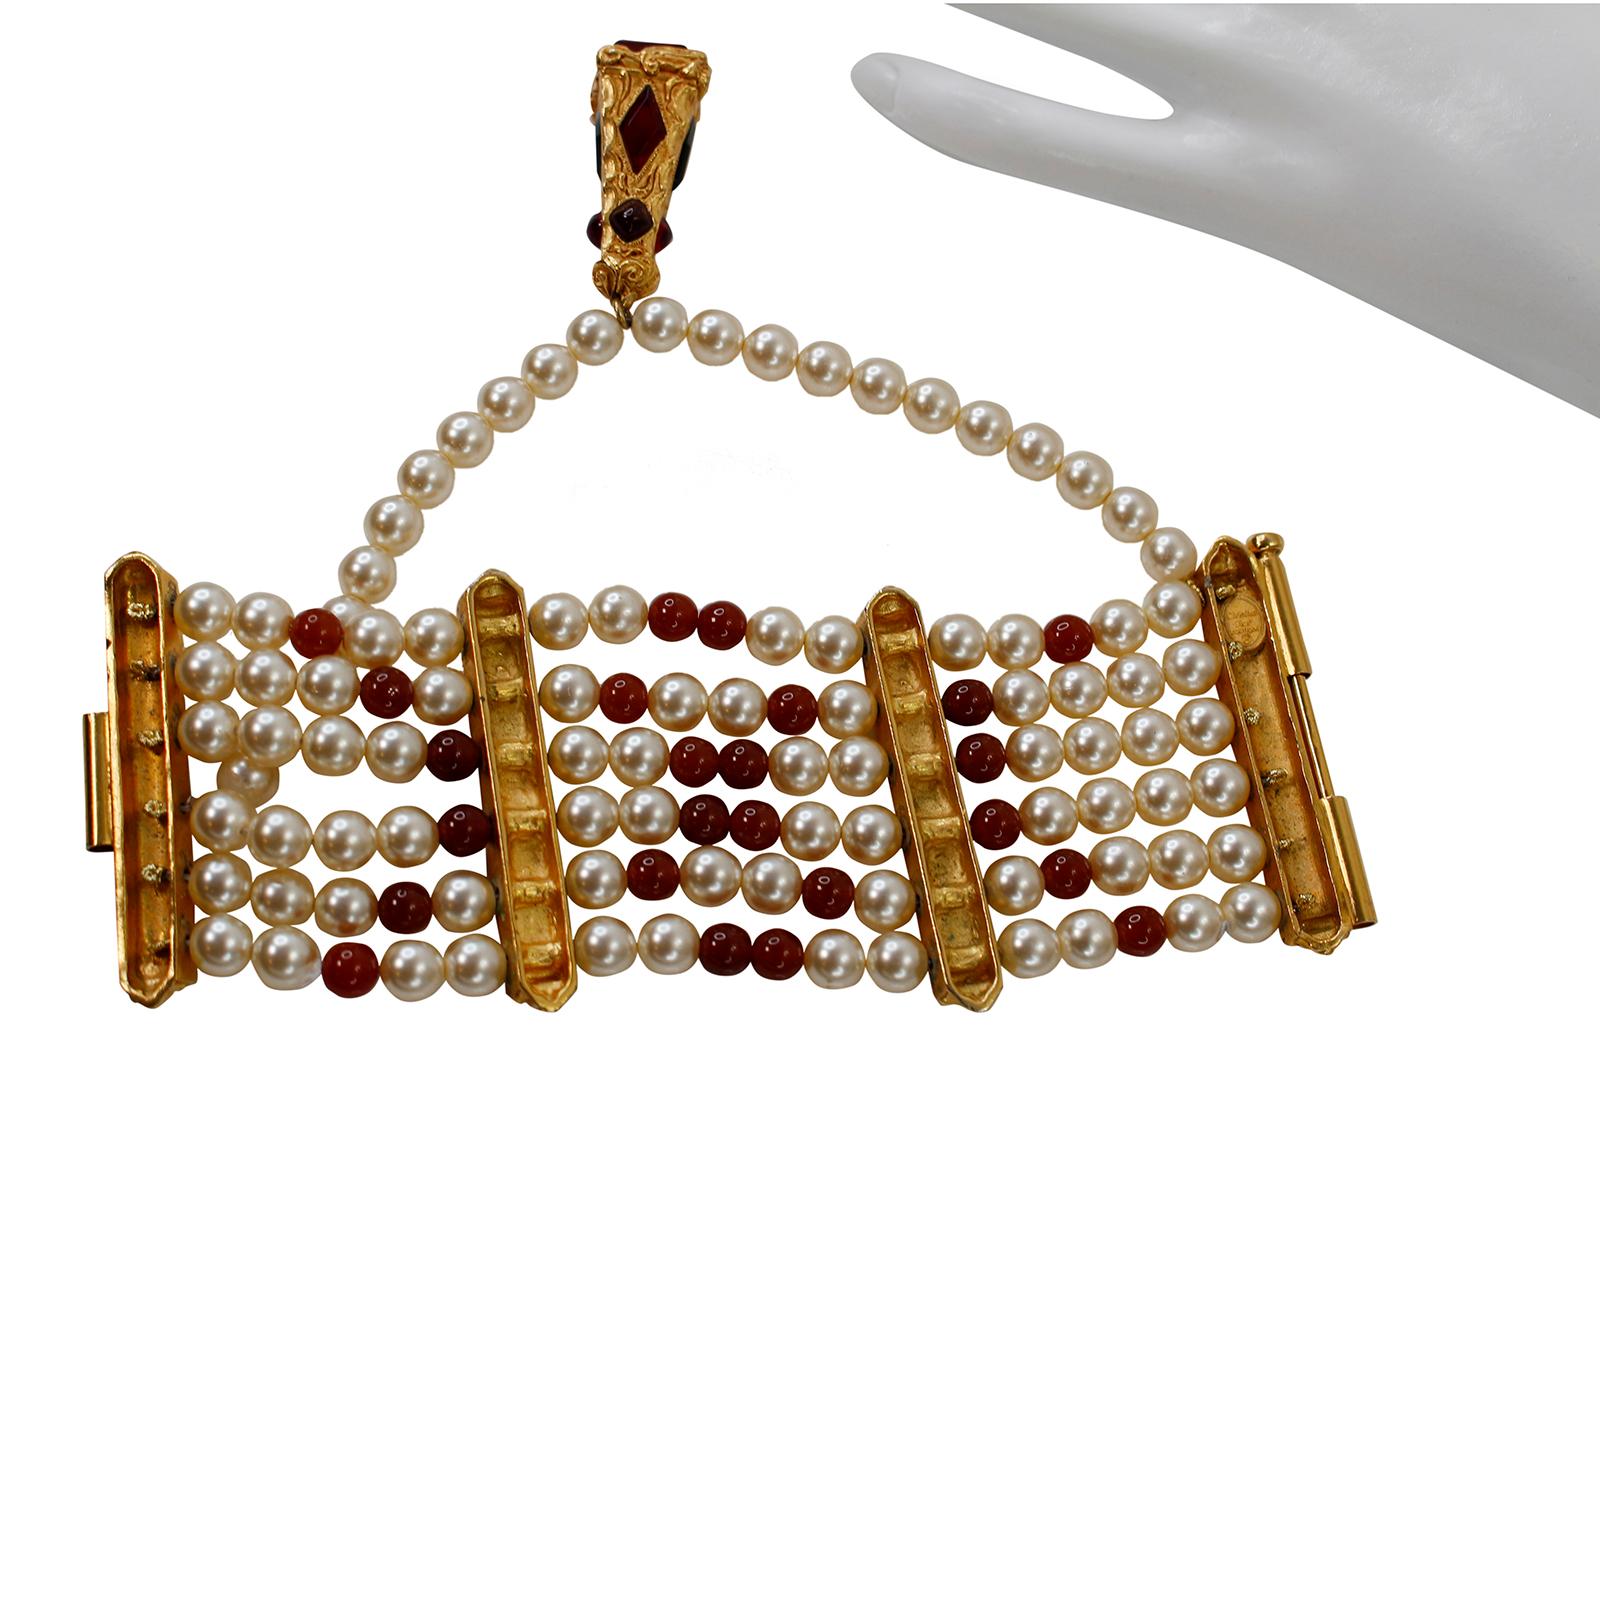 Vintage Christian Dior Gold and Faux Pearl Dangling Bracelet Circa 1980s In Good Condition For Sale In New York, NY